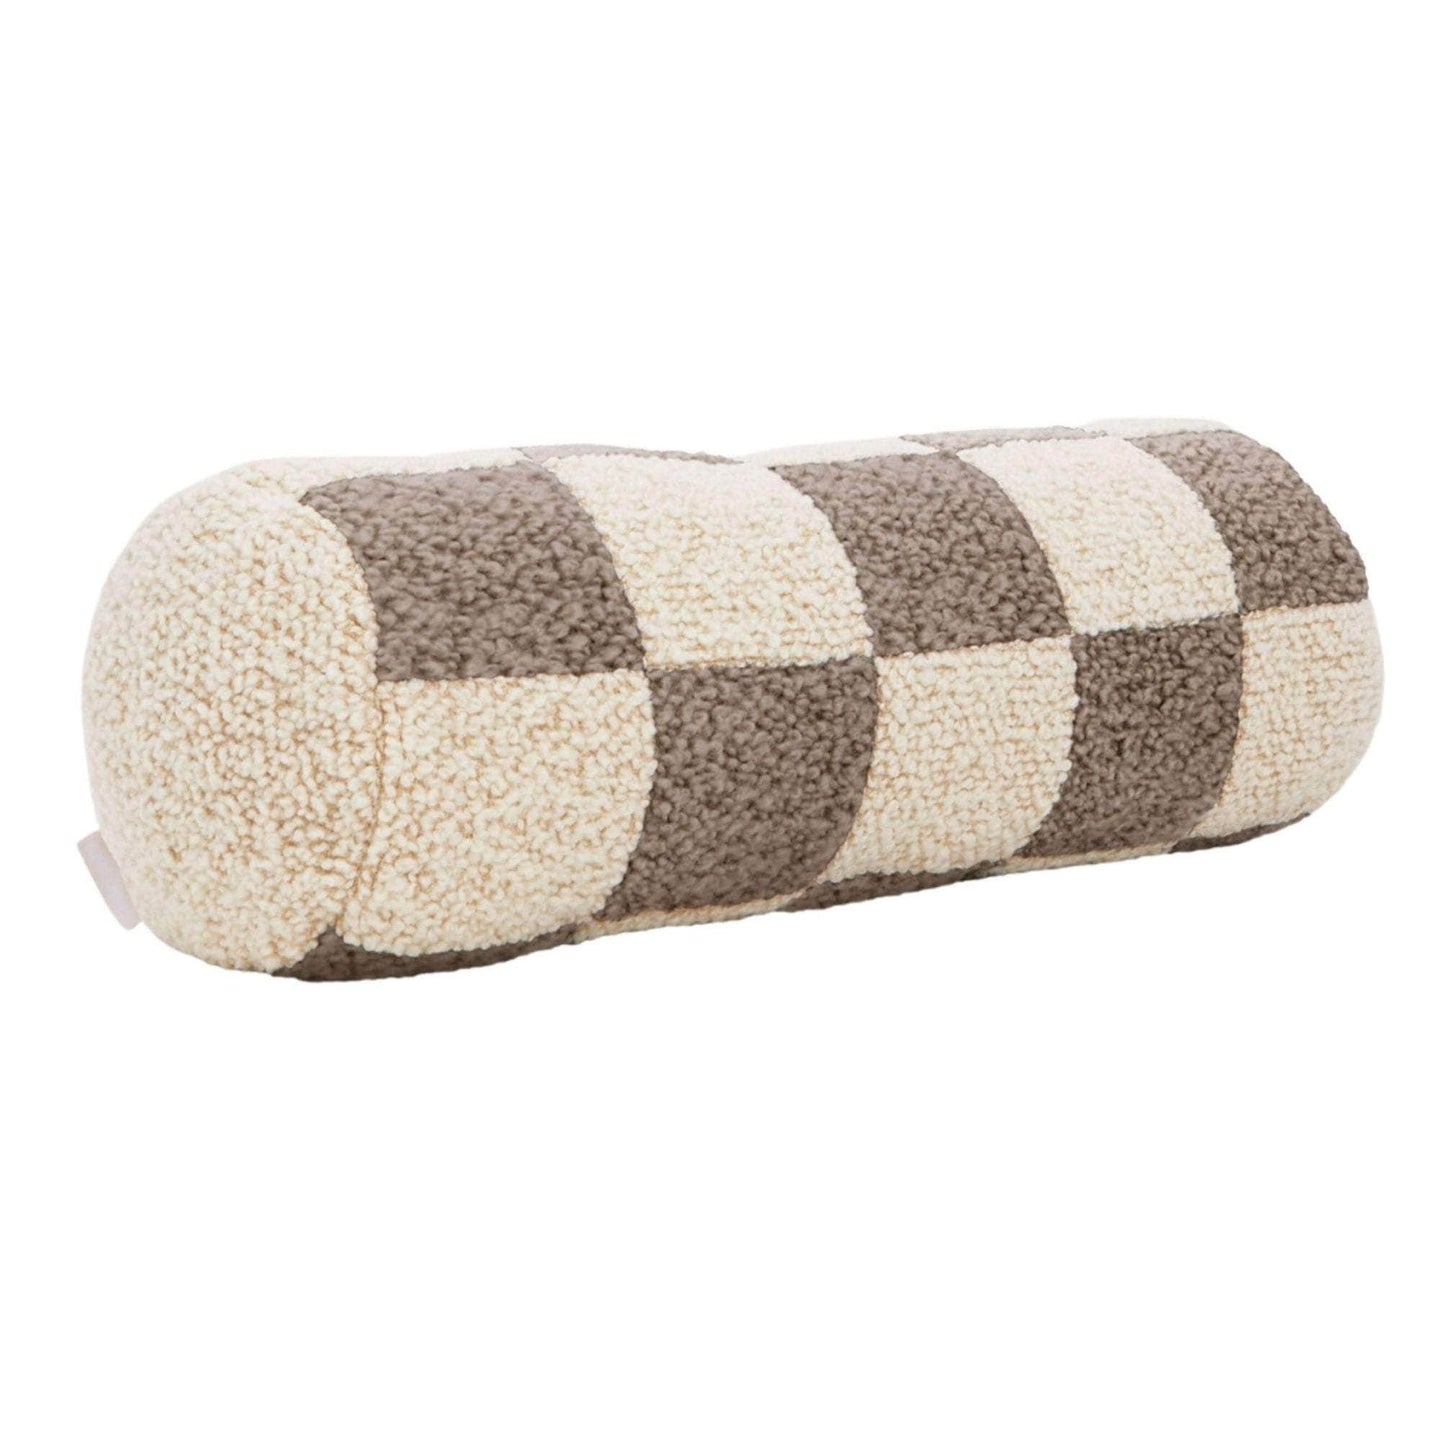 Le Cylindre - Wool Bouclé Checkered Bolster Sawdust/Eggshell